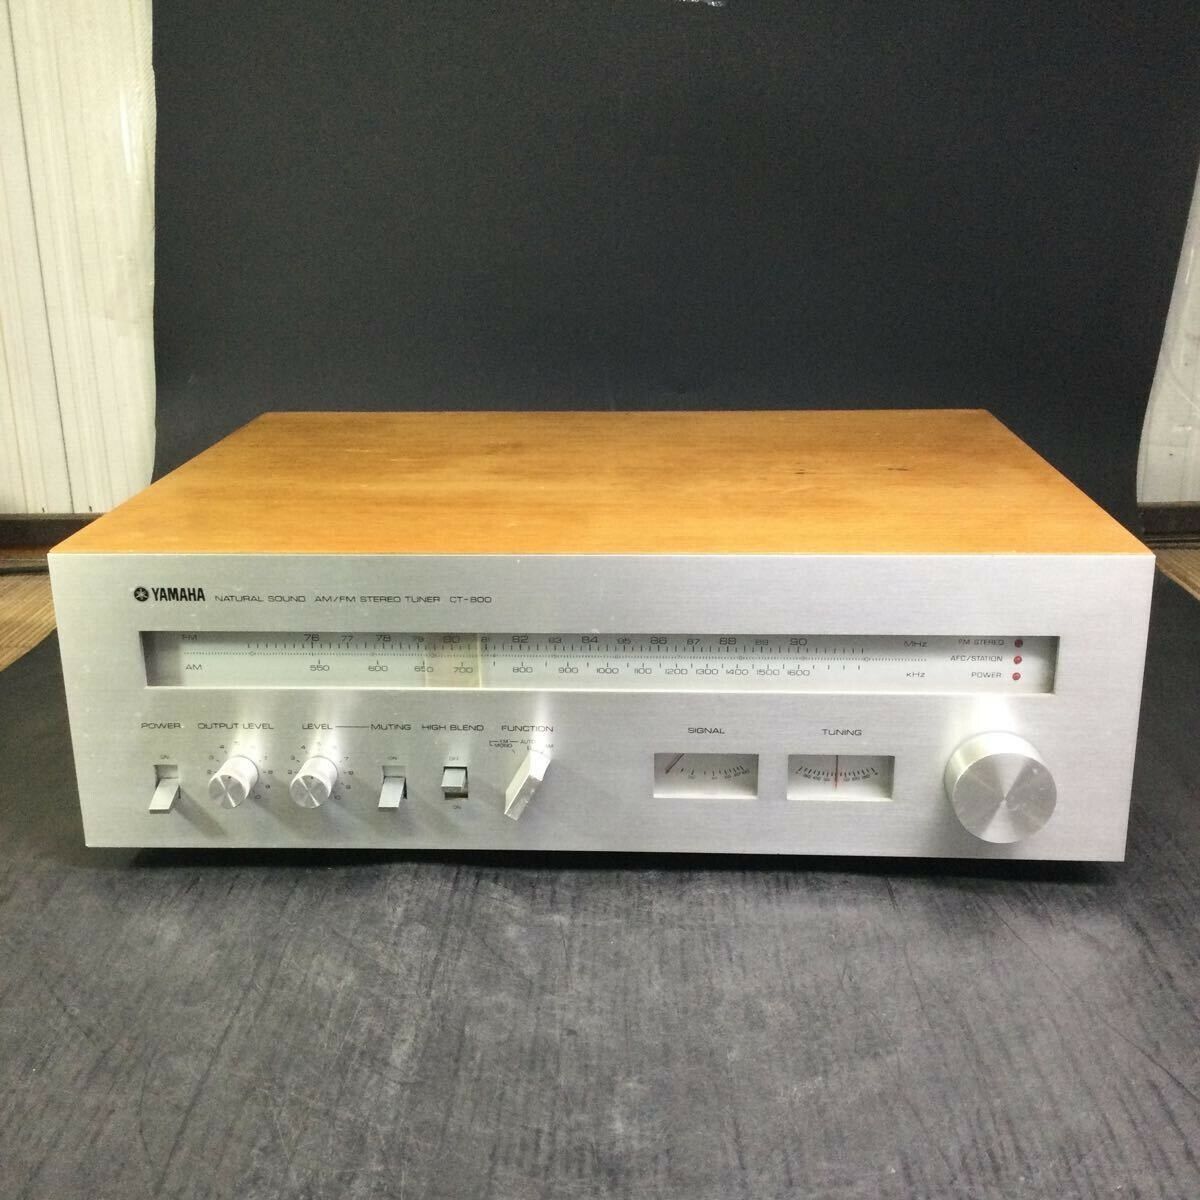 YAMAHA CT-800 Natural Sound AM/FM Stereo Tuner Fully Working 